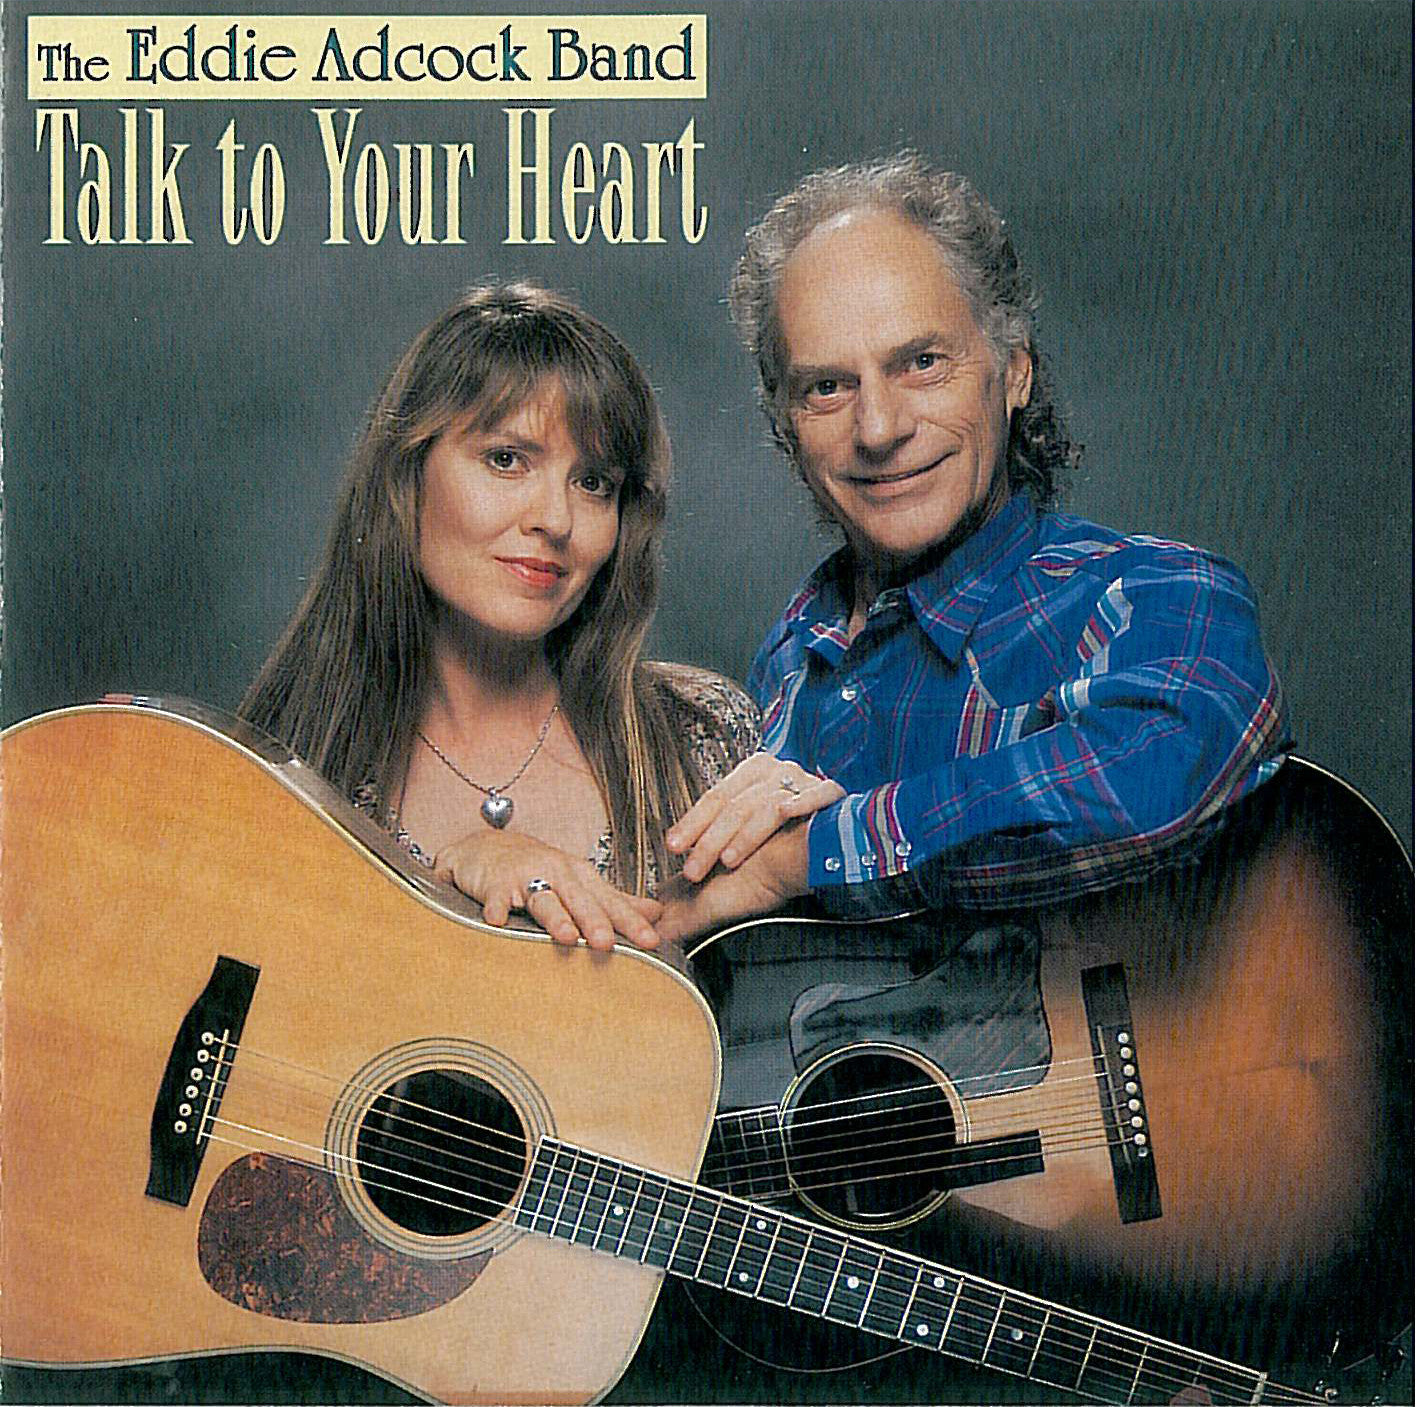 Eddie Adcock Band: Talk to Your Heart